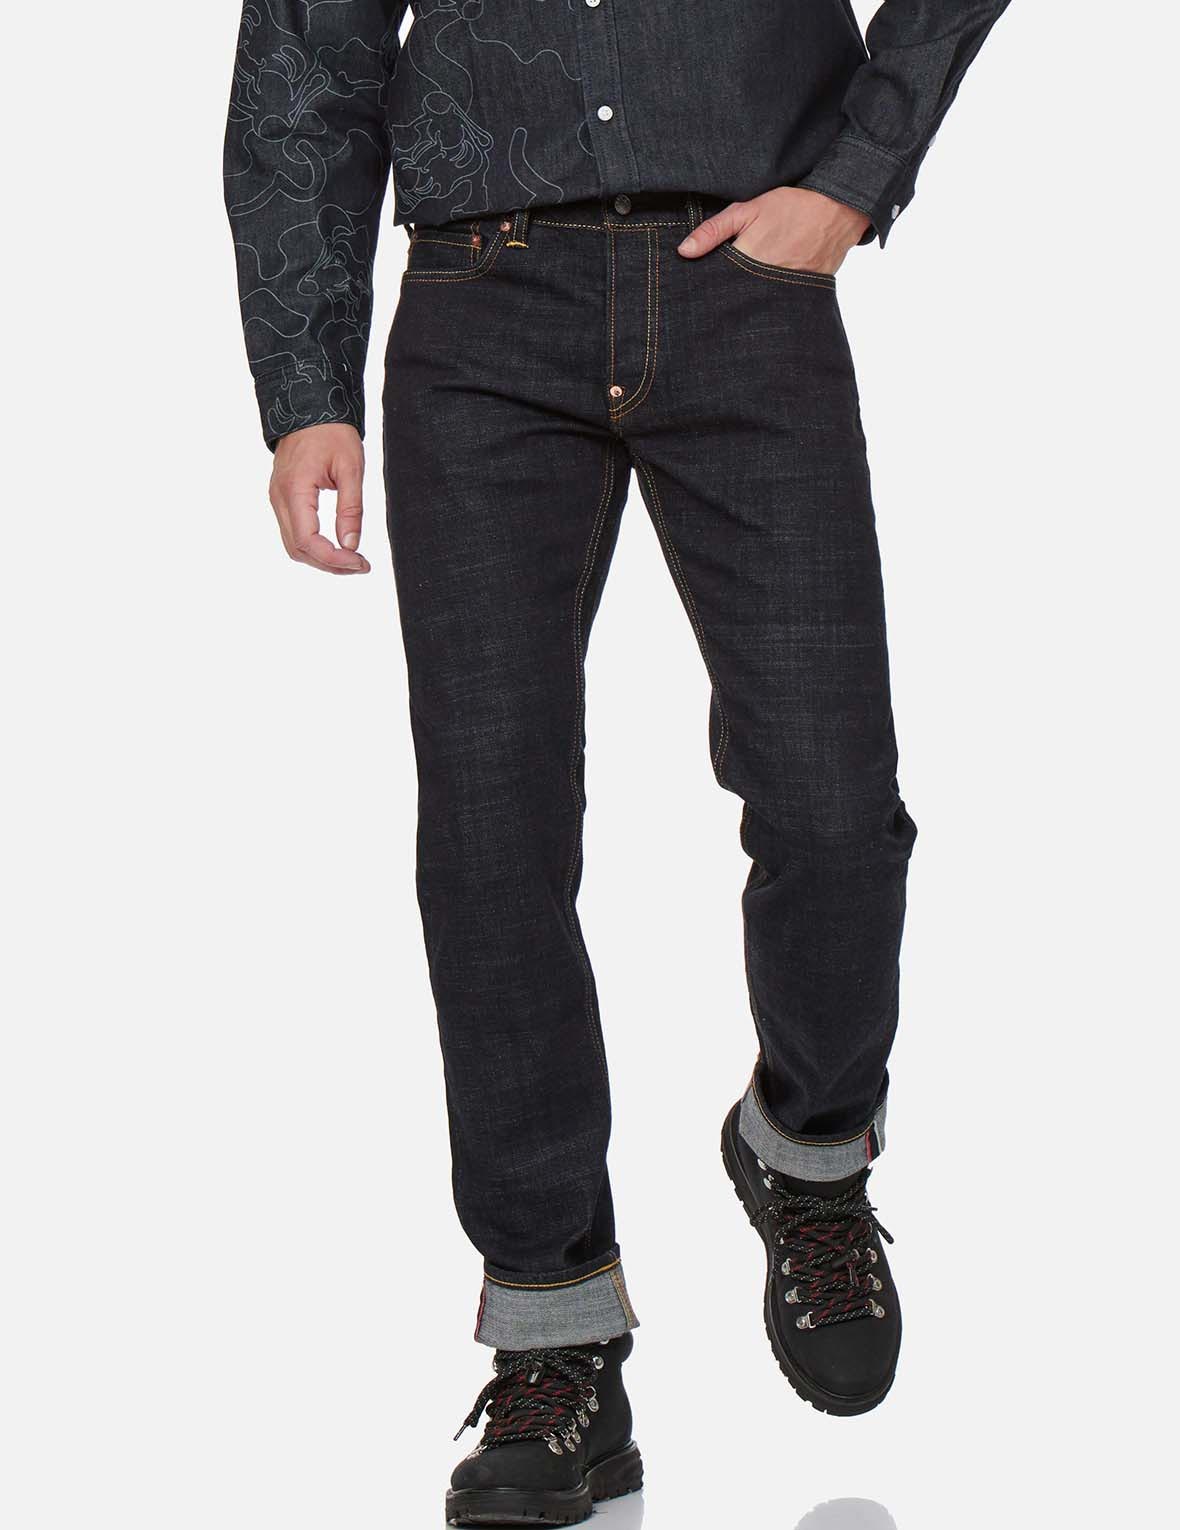 GODHEAD AND SEAGULL EMBROIDERED SLIM FIT JEANS #2010